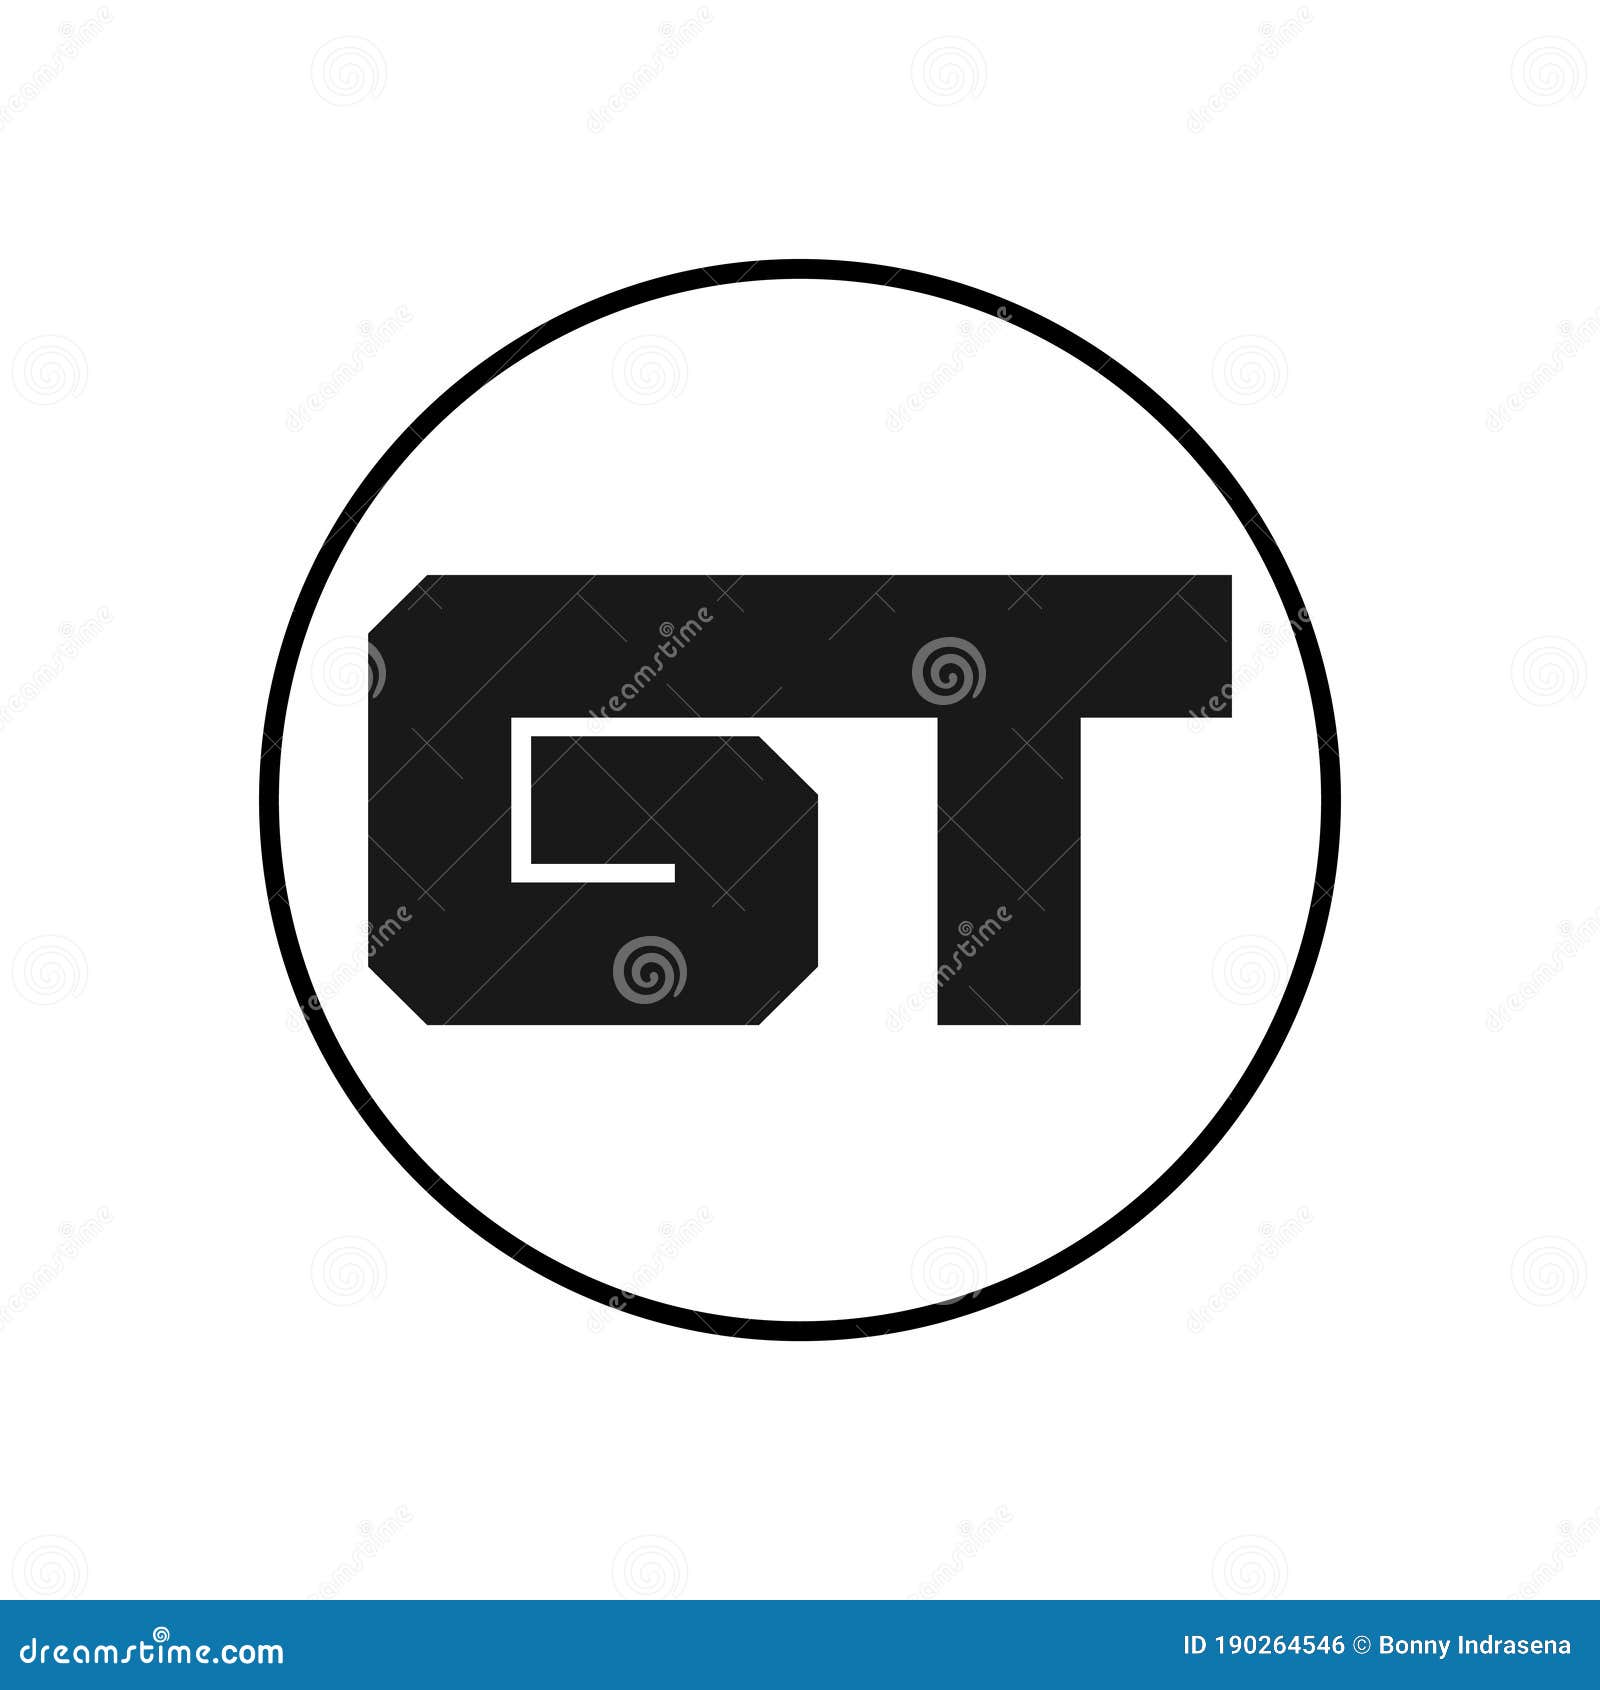 gt letter logo  with simple style